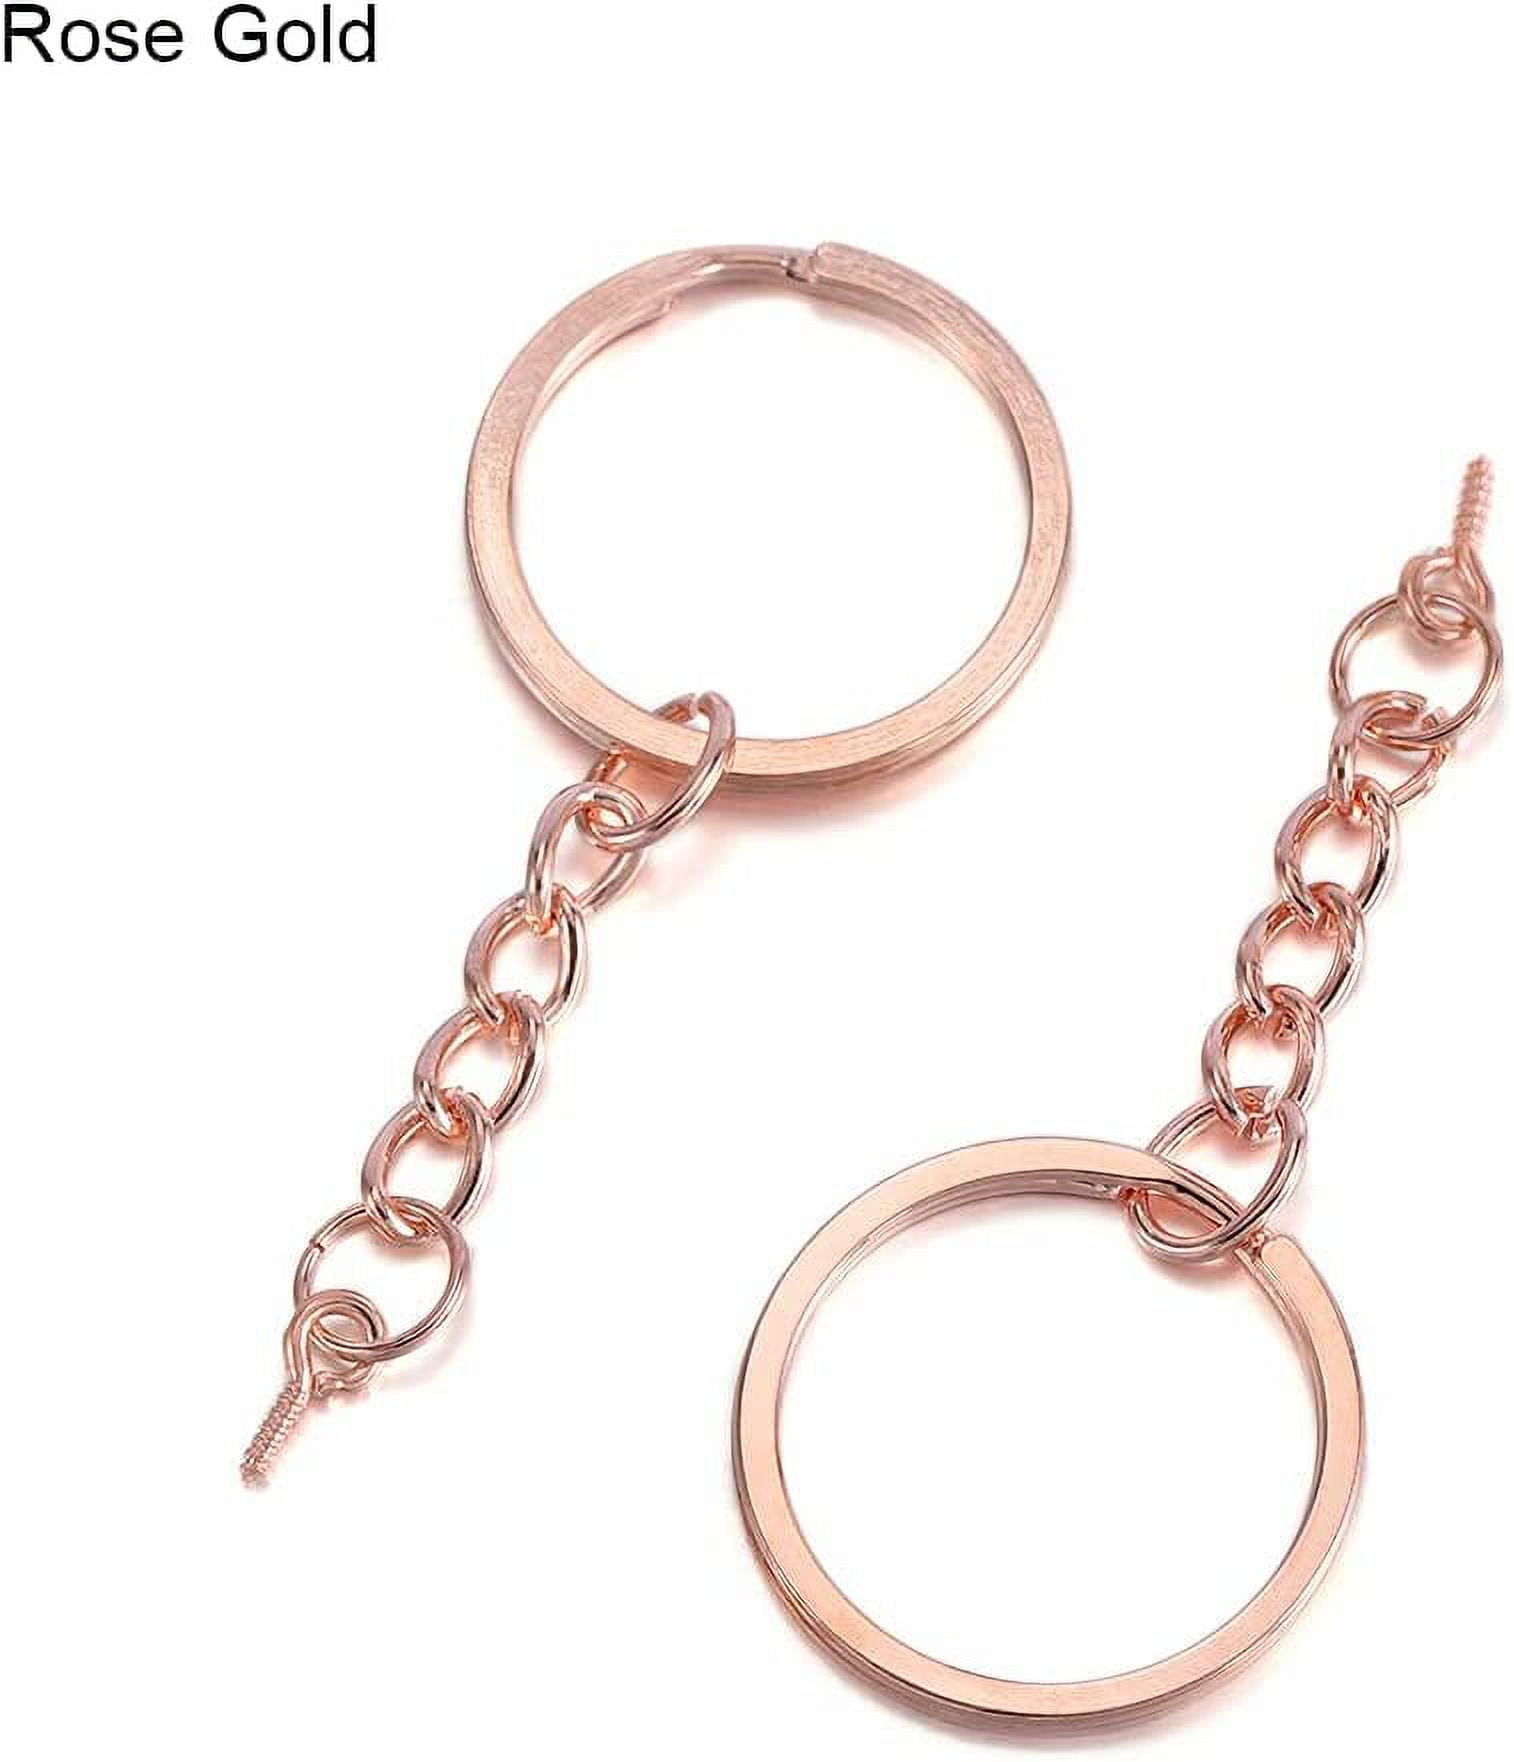 Personalizablex Premium 30mm Flat Key Chain Rings with Attached Chain - Perfect for Crafts - 5 Colors. Rose Gold, Gold, Silver, Black and Gunmetal.